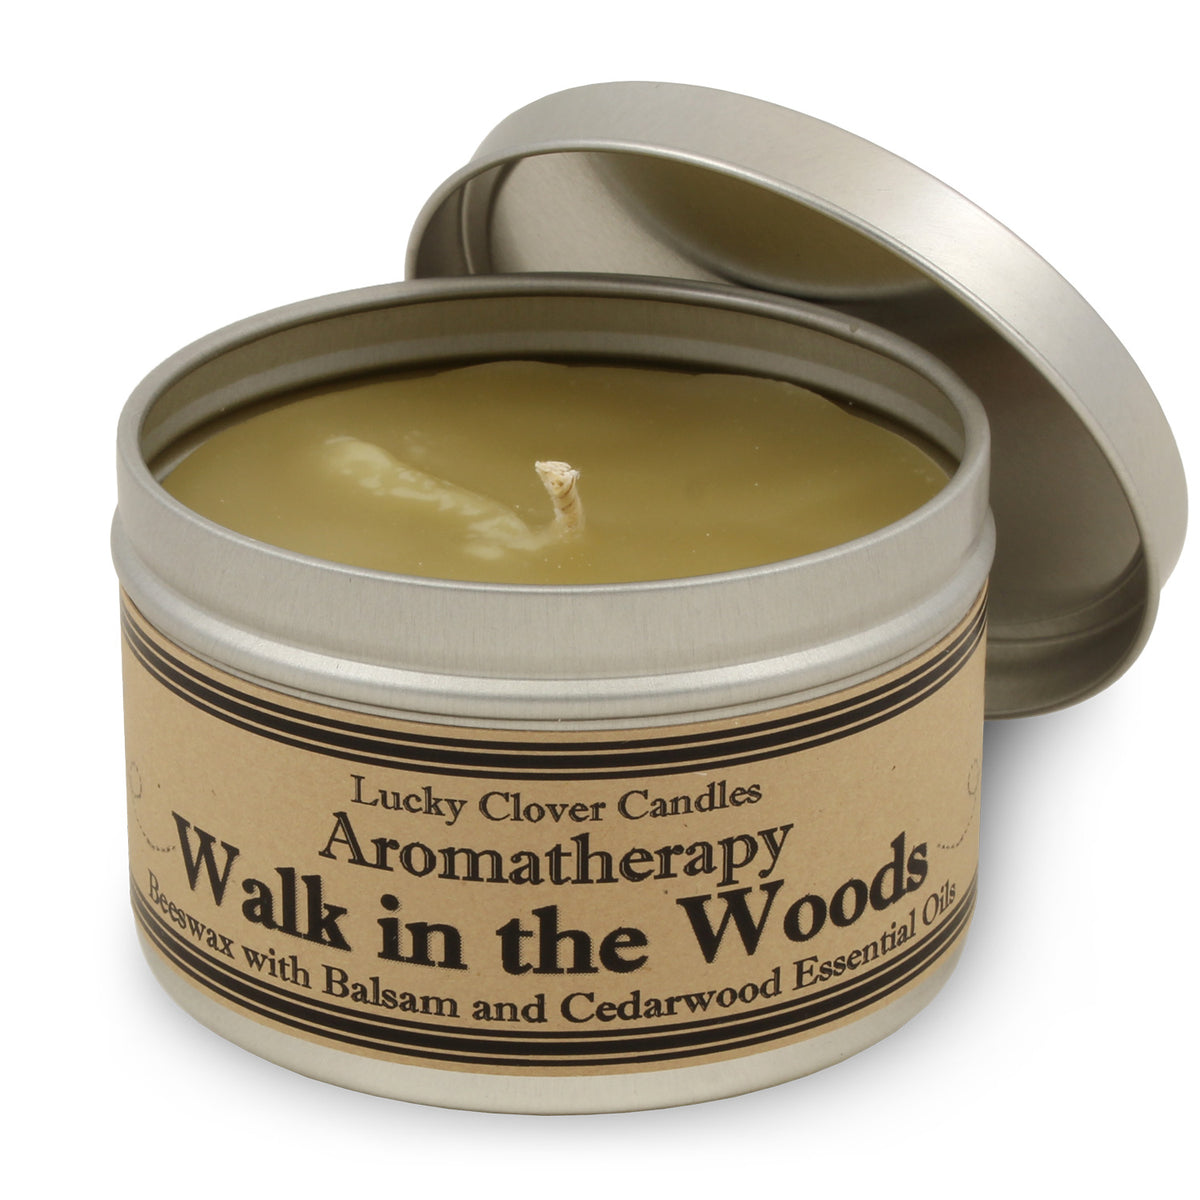 Aromatherapy Candle - Walk in the Woods